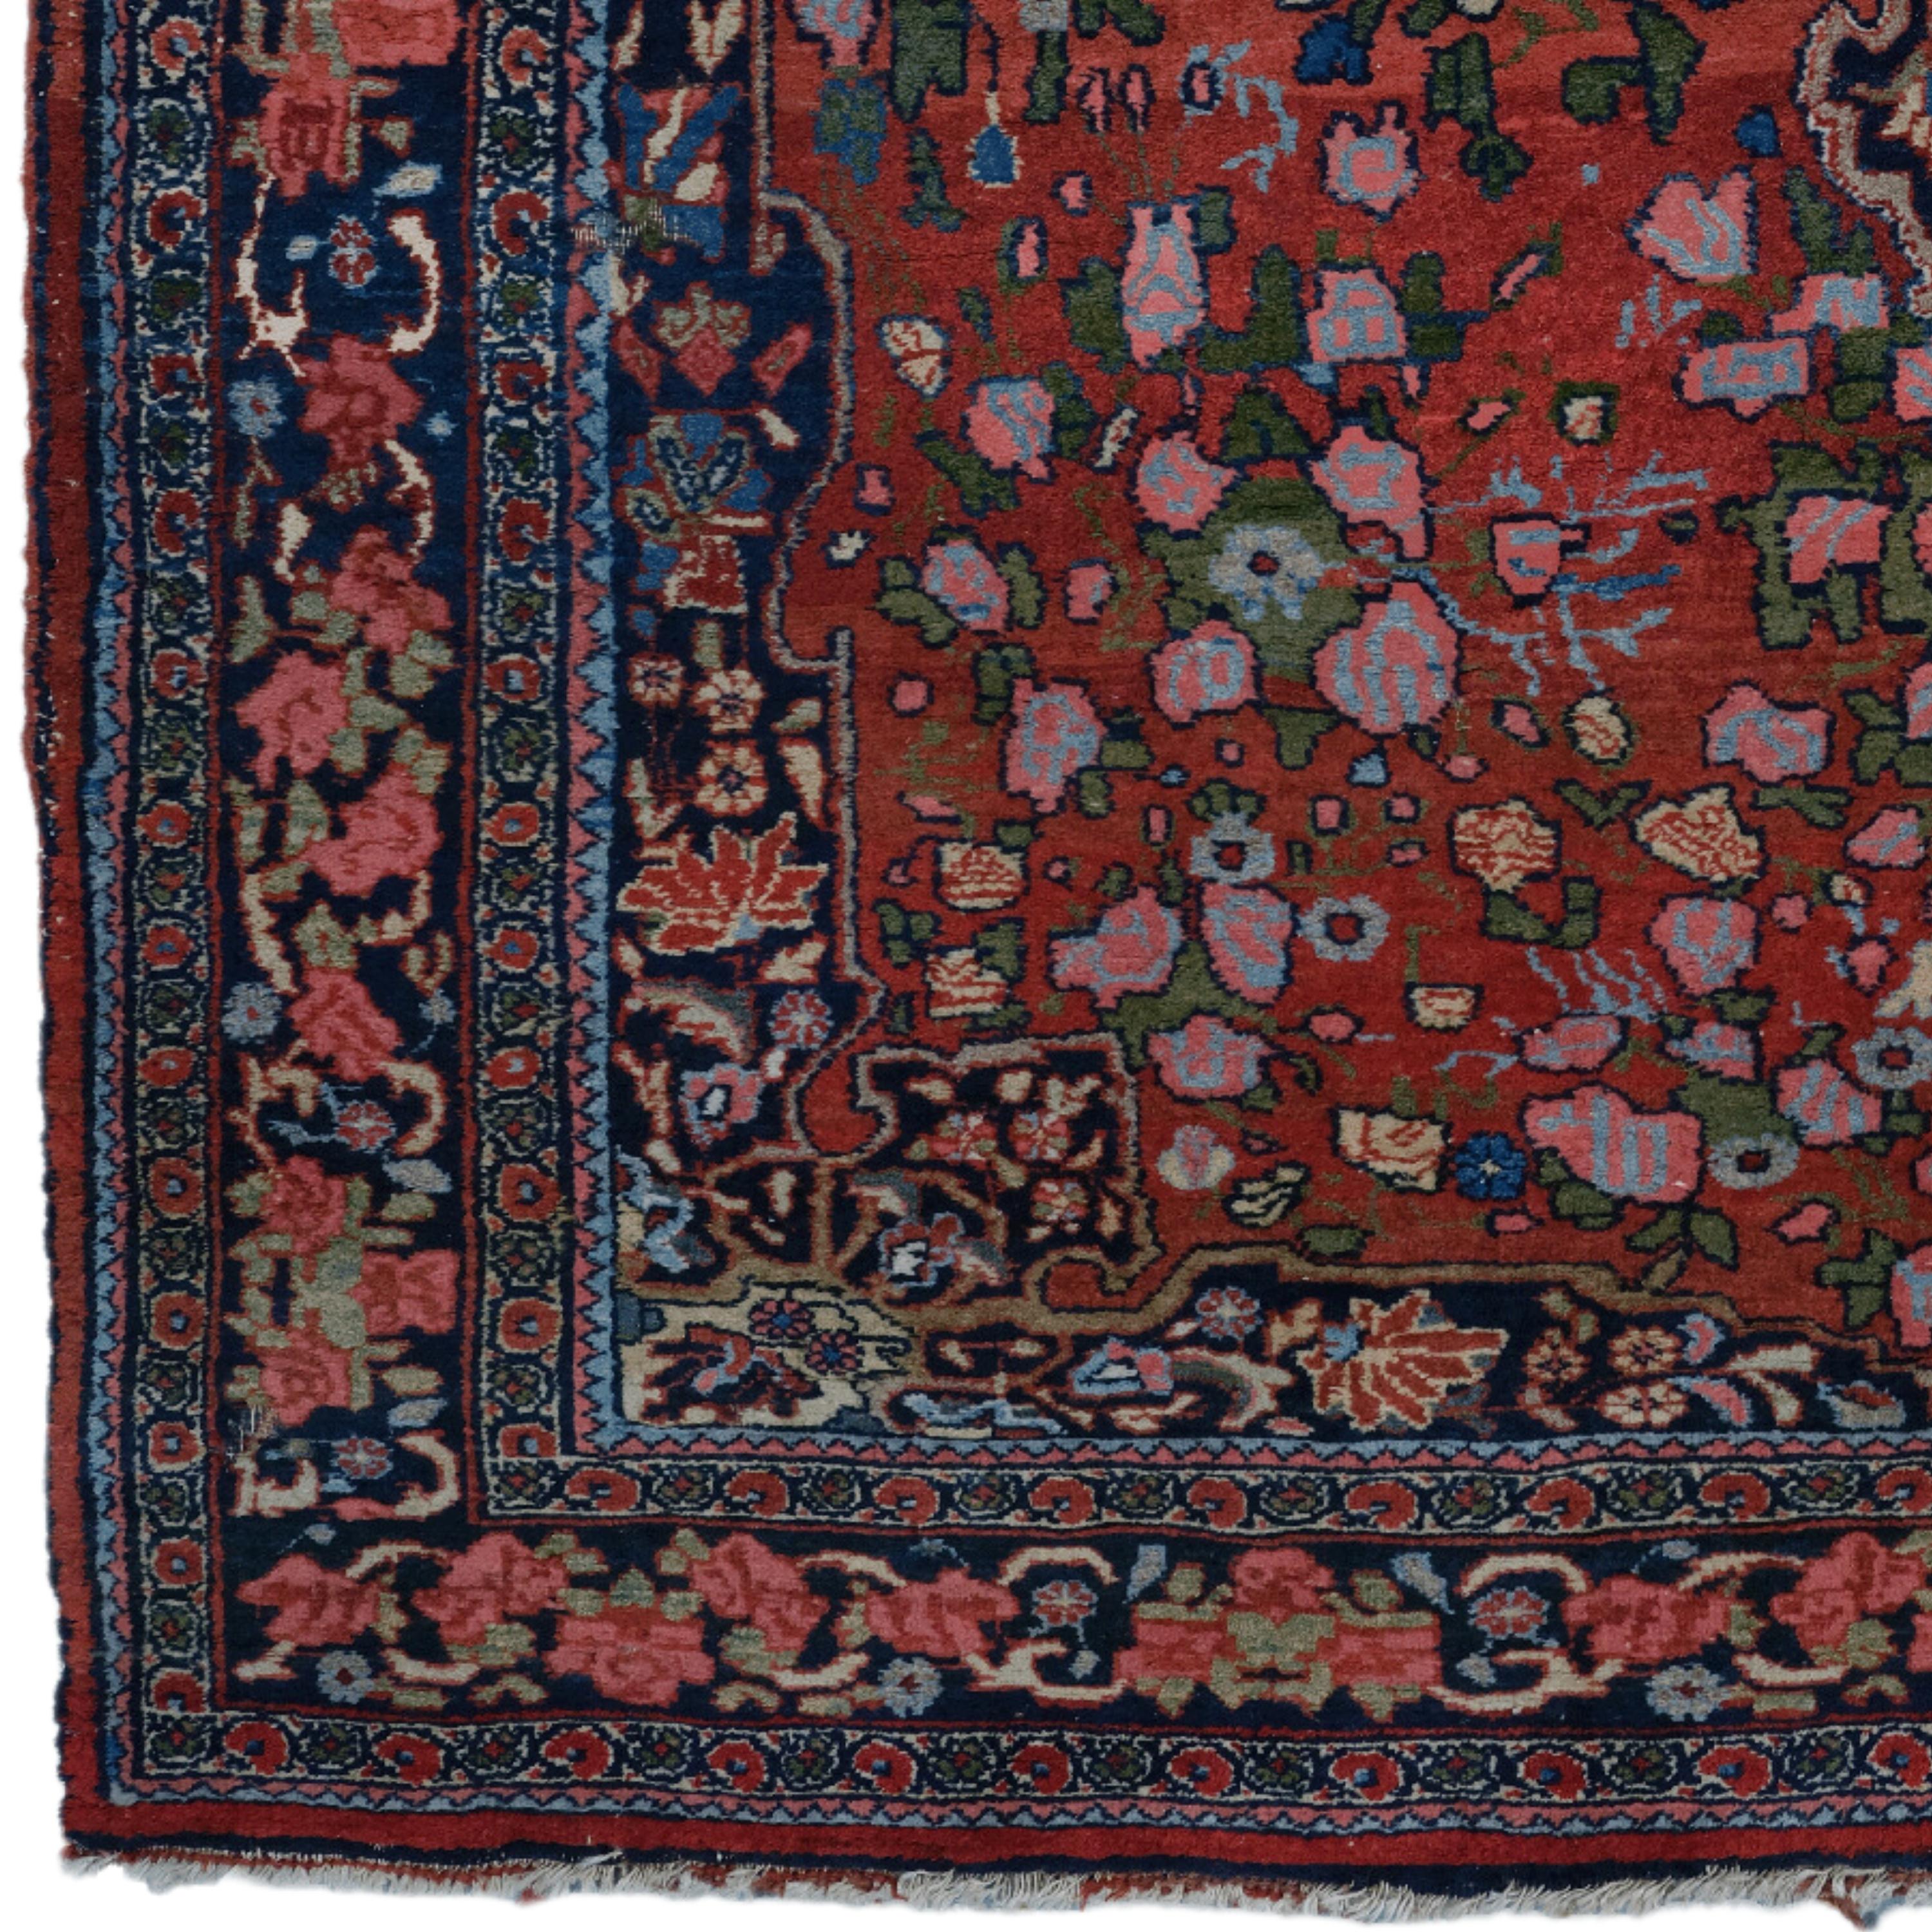 This elegant 19th century Bidjar rug is a work of art, carefully woven and withstood the test of time. The dark red primary color palette is perfectly complemented by detailed patterns in various colors. The complex motif at the center of the